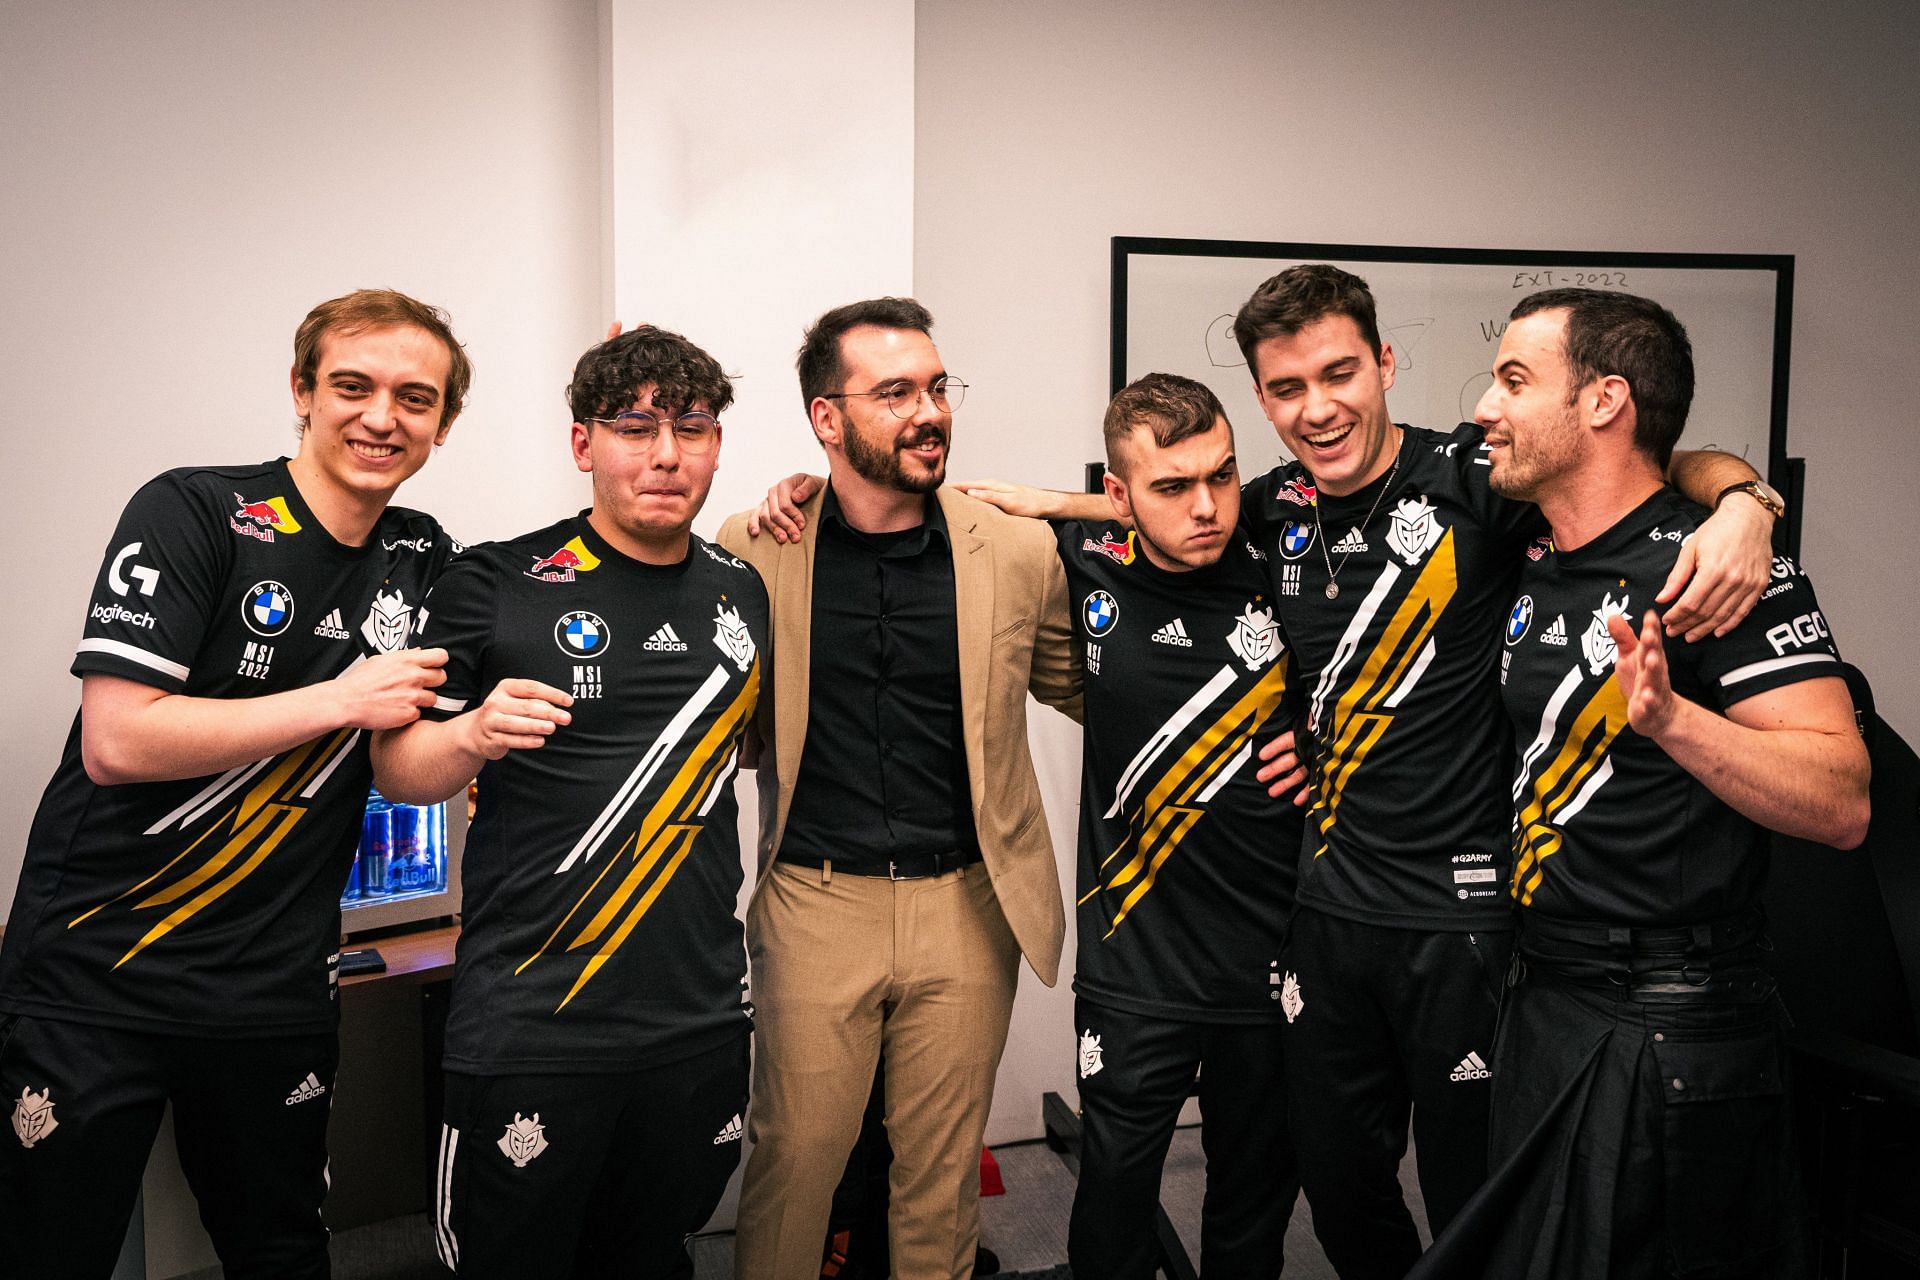 G2 Esports might have had a bad final in the LEC, but this team has the potential to shine (Image via League of Legends)